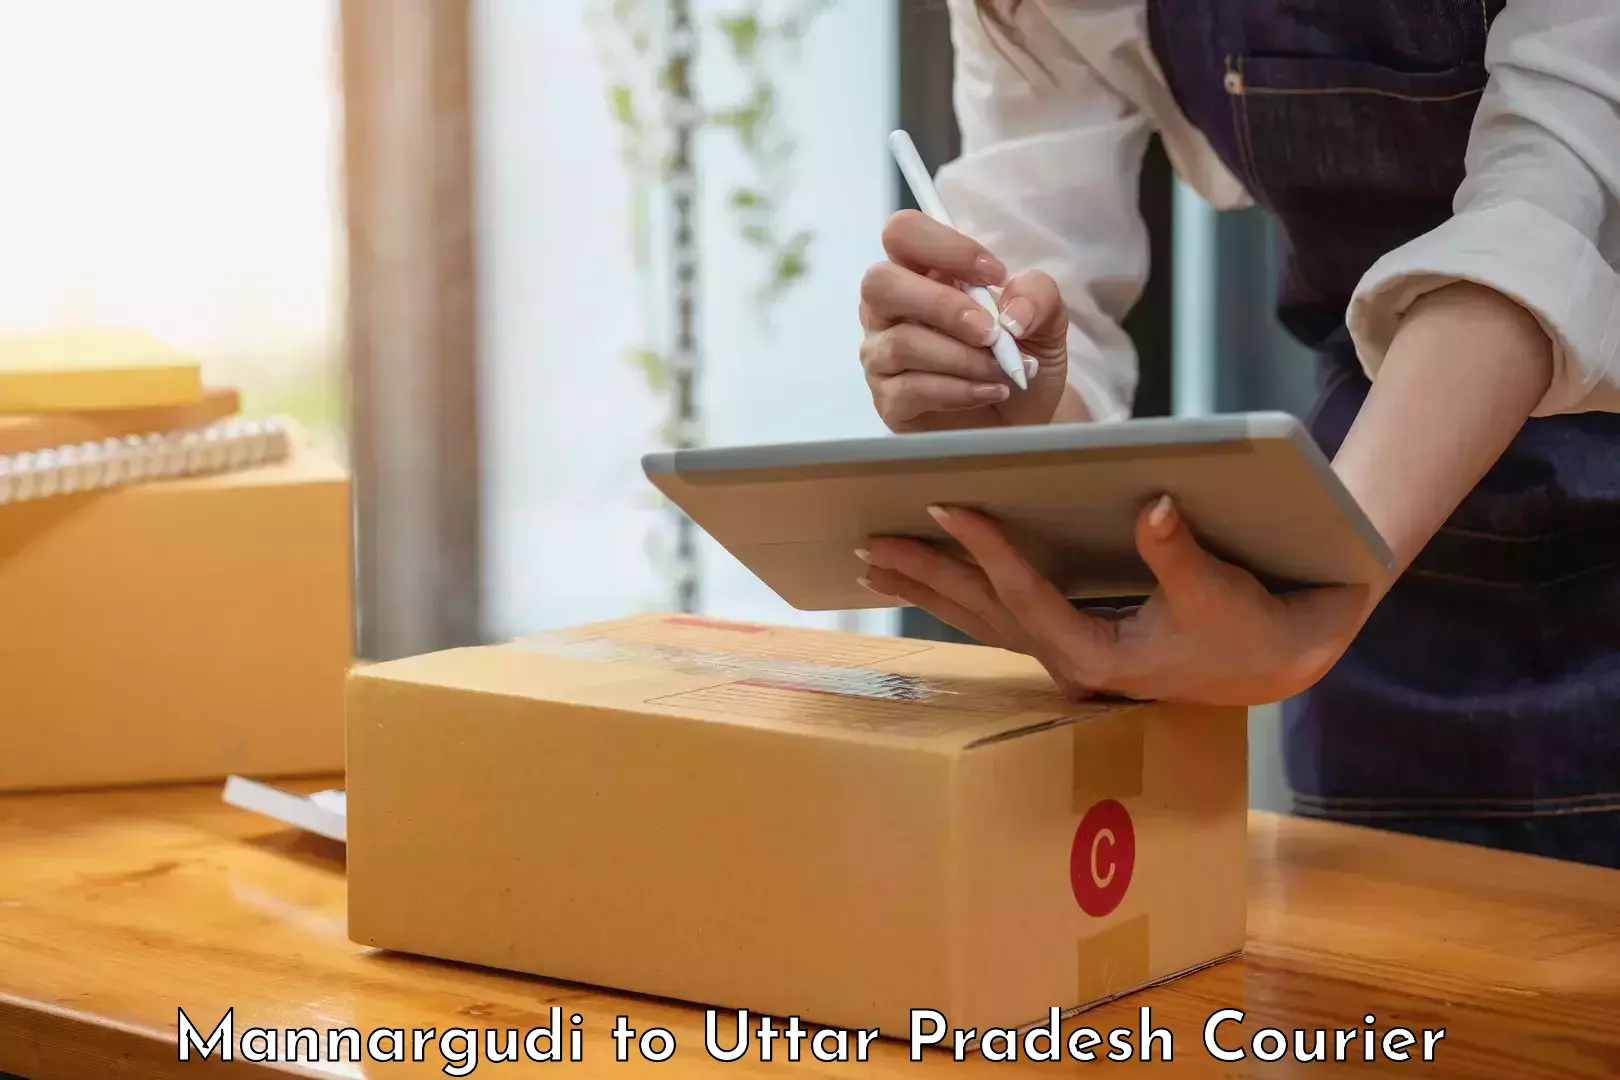 Urgent courier needs Mannargudi to Poonchh